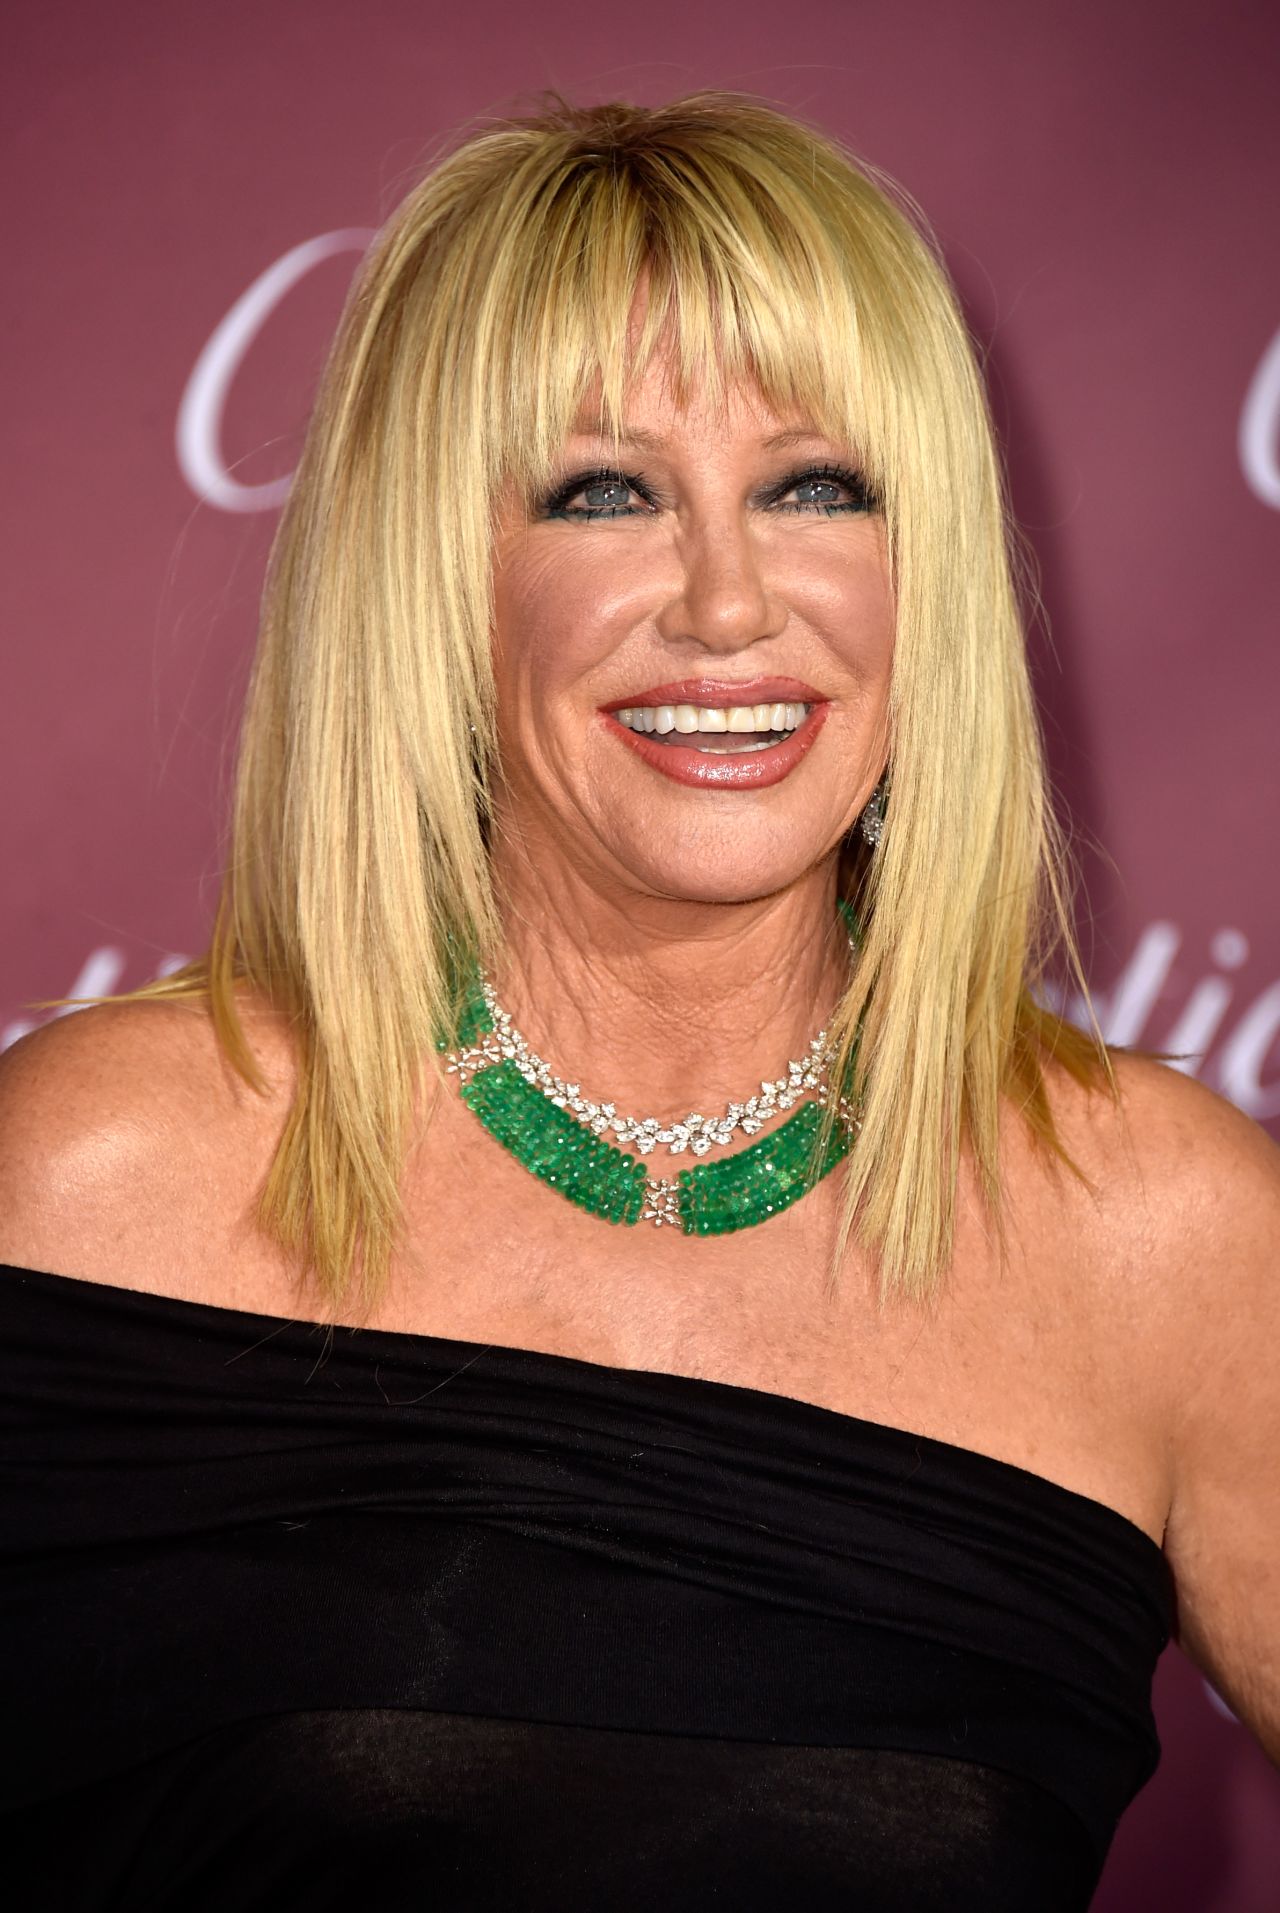 Actress Suzanne Somers, known for her role on "Three's Company," her books and her product sales, was also sent home. 